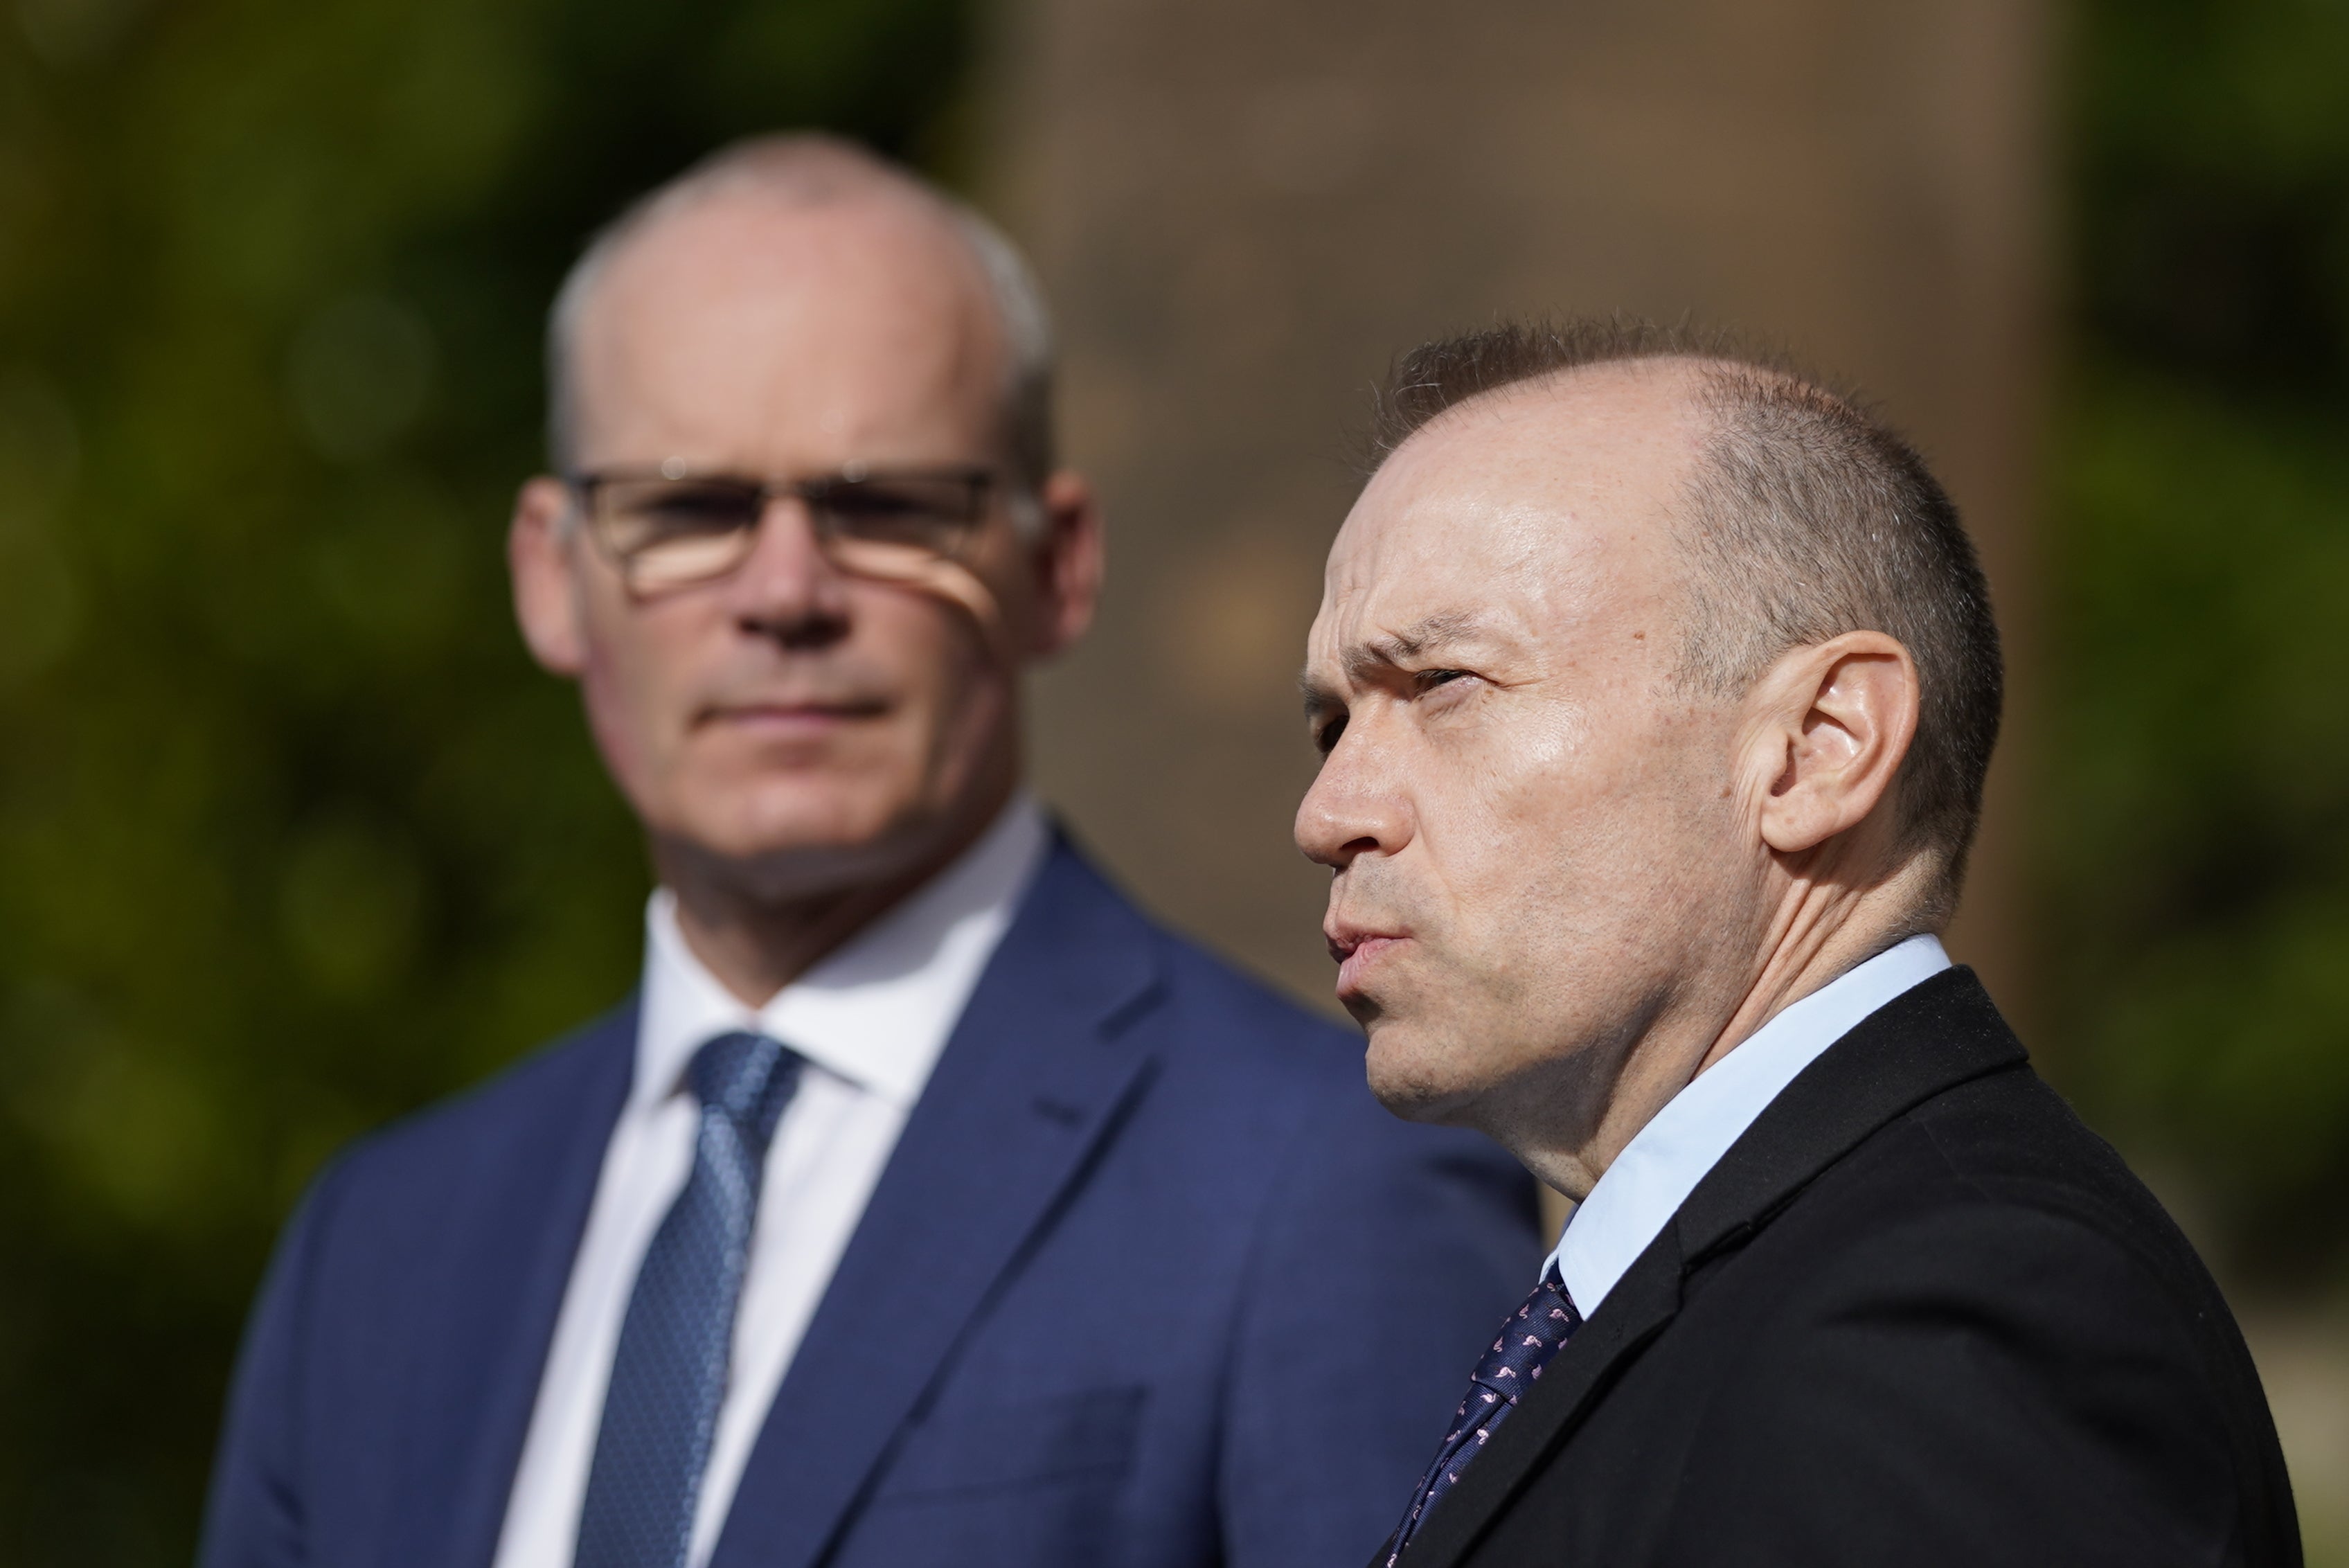 Northern Ireland Secretary Chris Heaton-Harris and Irish Foreign Affairs Minister Simon Coveney during a press conference at Hillsborough Castle (Niall Carson/PA)